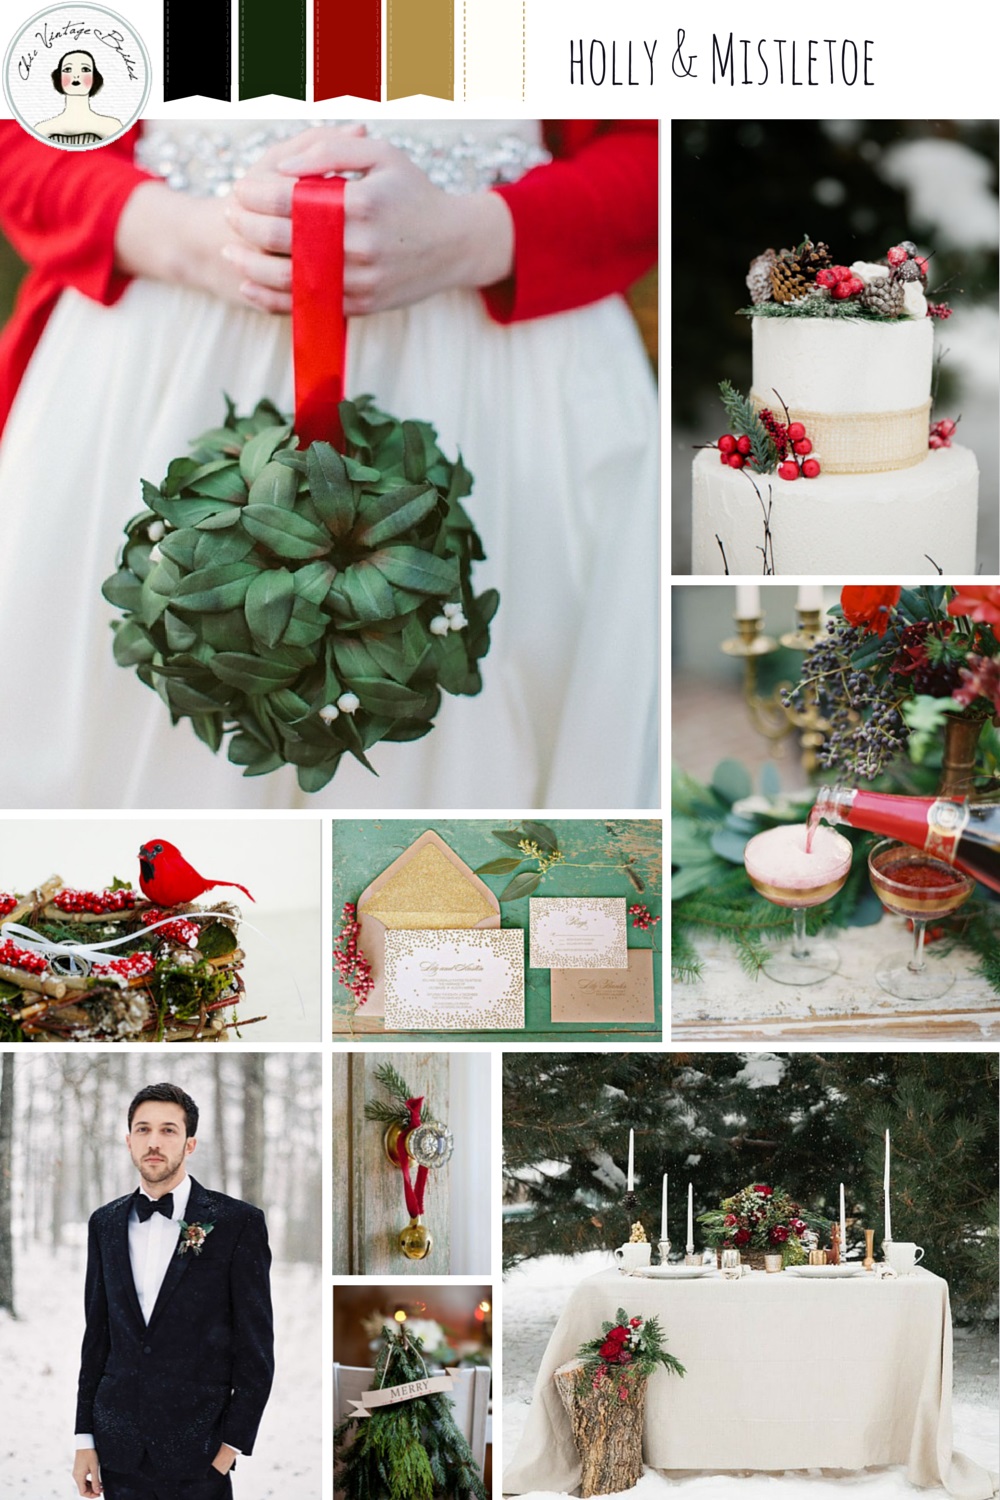 Holly & Mistletoe - Christmas Wedding Inspiration in Rich Shades of Red, Gold & Green